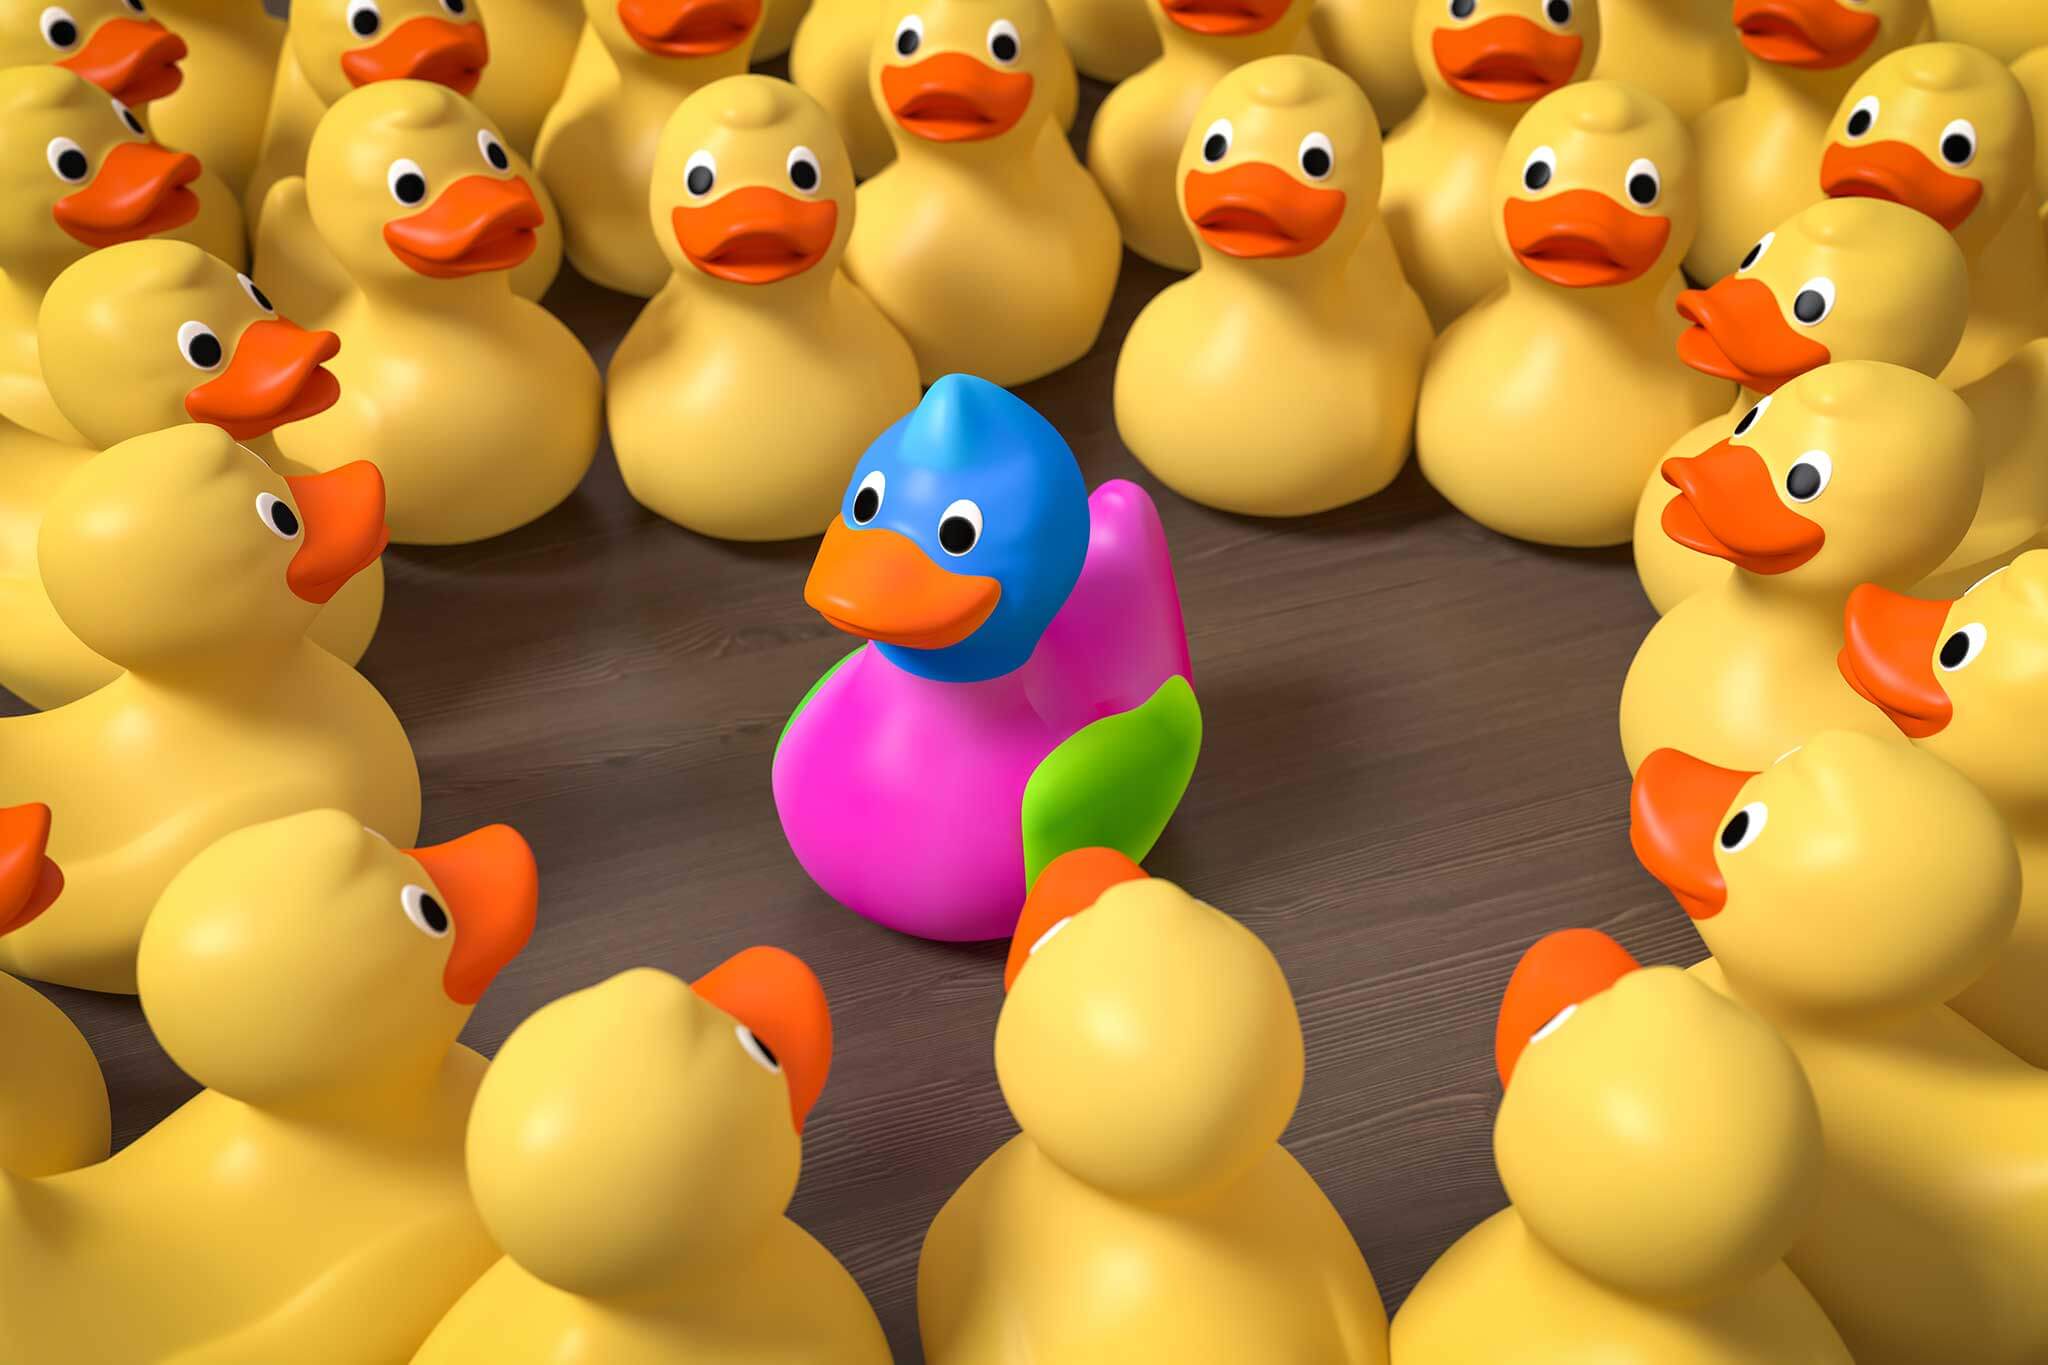 stand out colorful rubber duck - colorful branding image